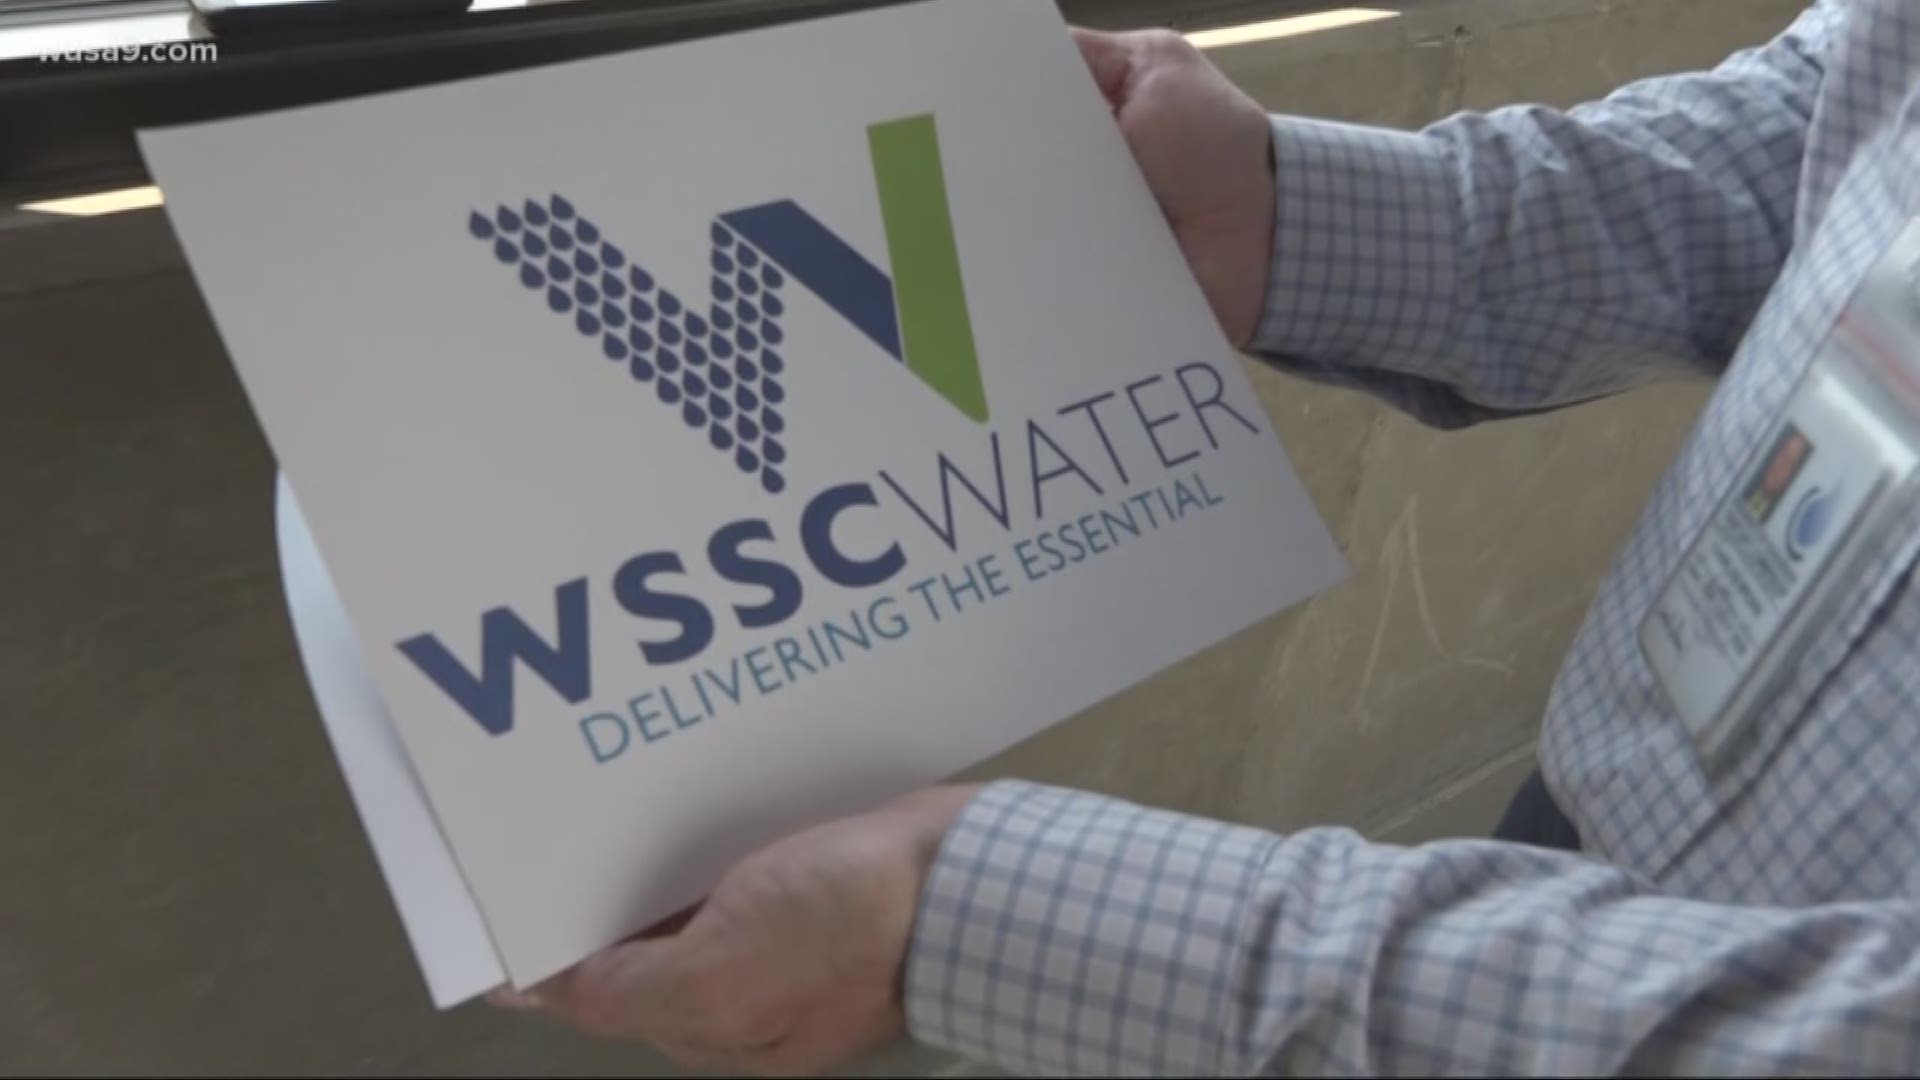 The Washington Suburban Sanitary Commission has delivered water and wastewater service to Maryland's Suburbs since 1918 under the same name.

But in its 101st year, the agency is moving ahead with a $900,000 plan to re-brand itself by changing its logo and adding the word "water" to its name.